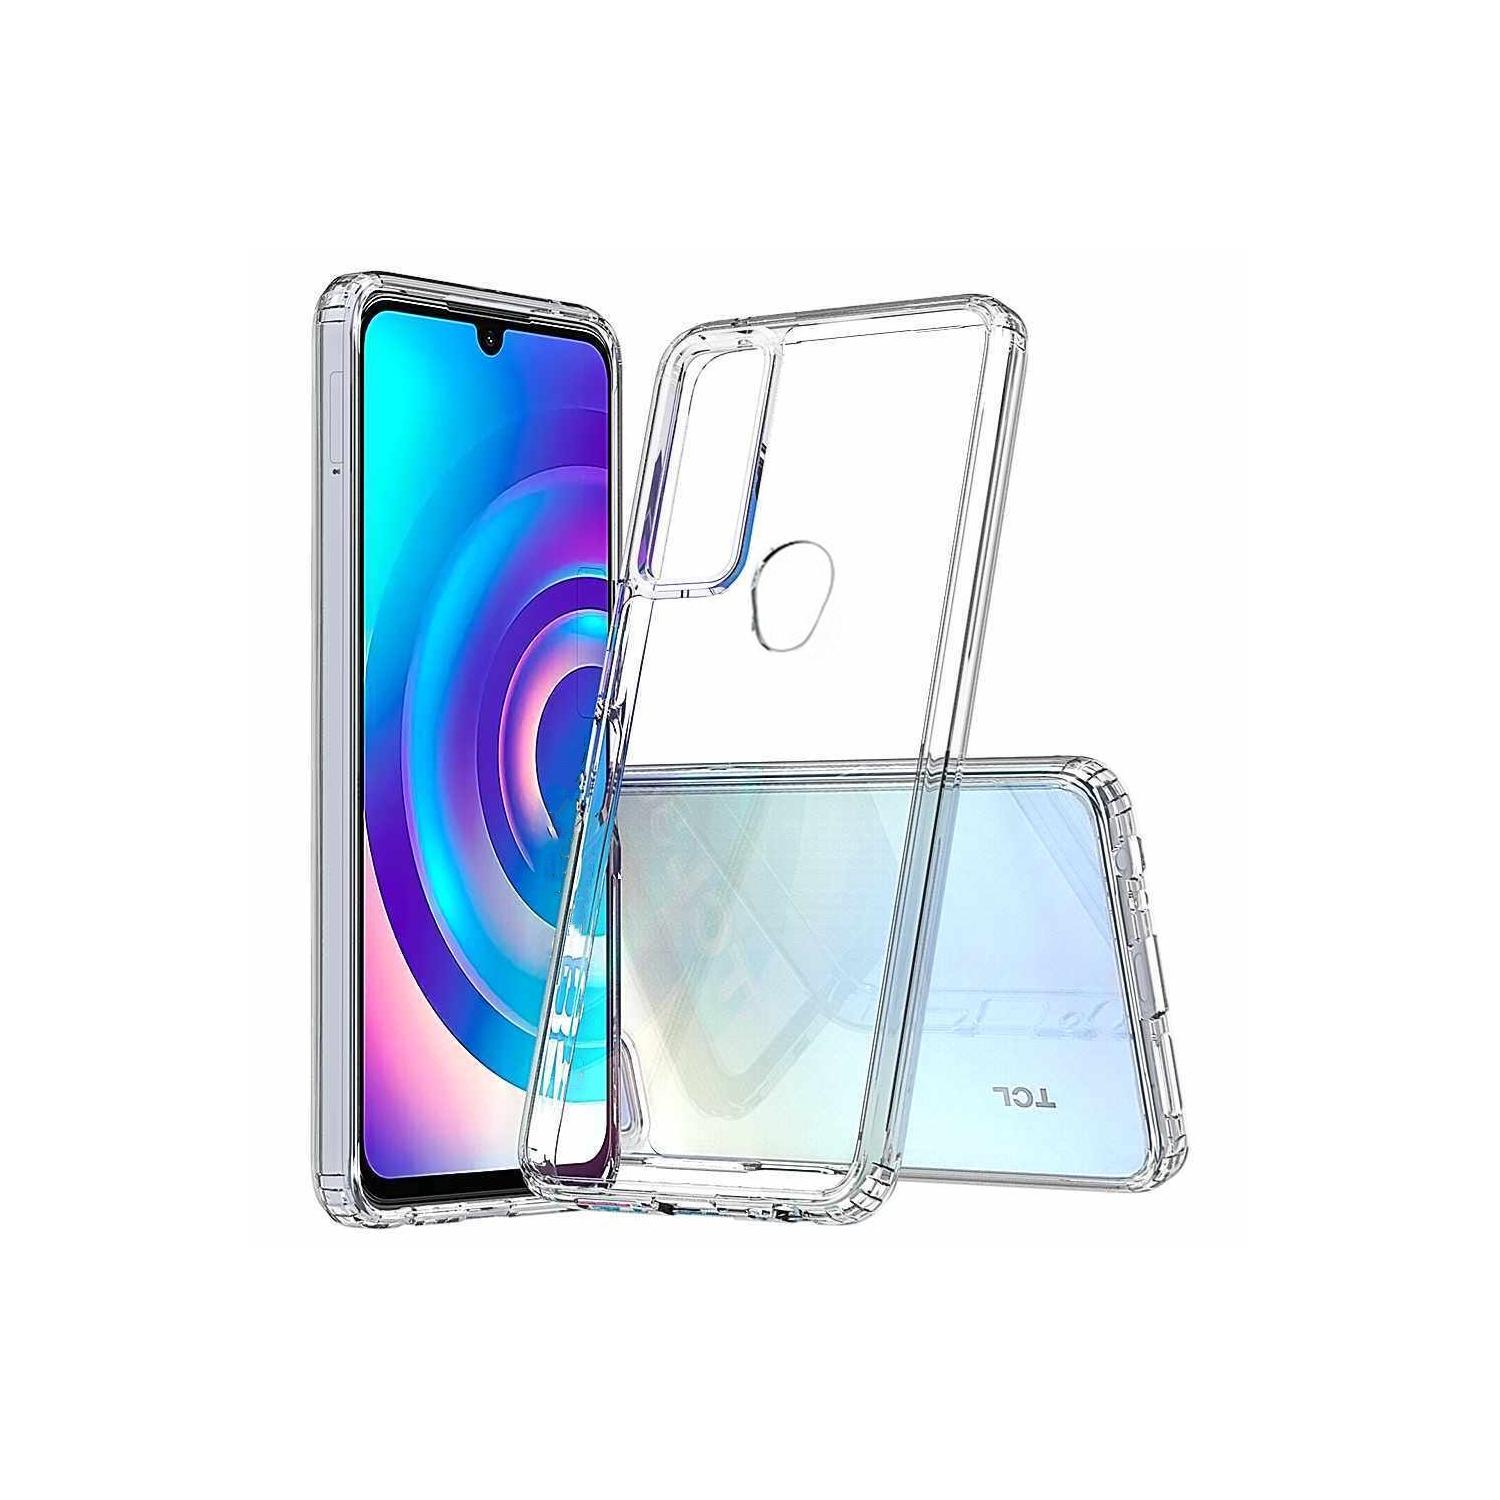 【CSmart】 Ultra Thin Soft TPU Silicone Jelly Bumper Back Cover Case for TCL 30 XE 5G, Clear